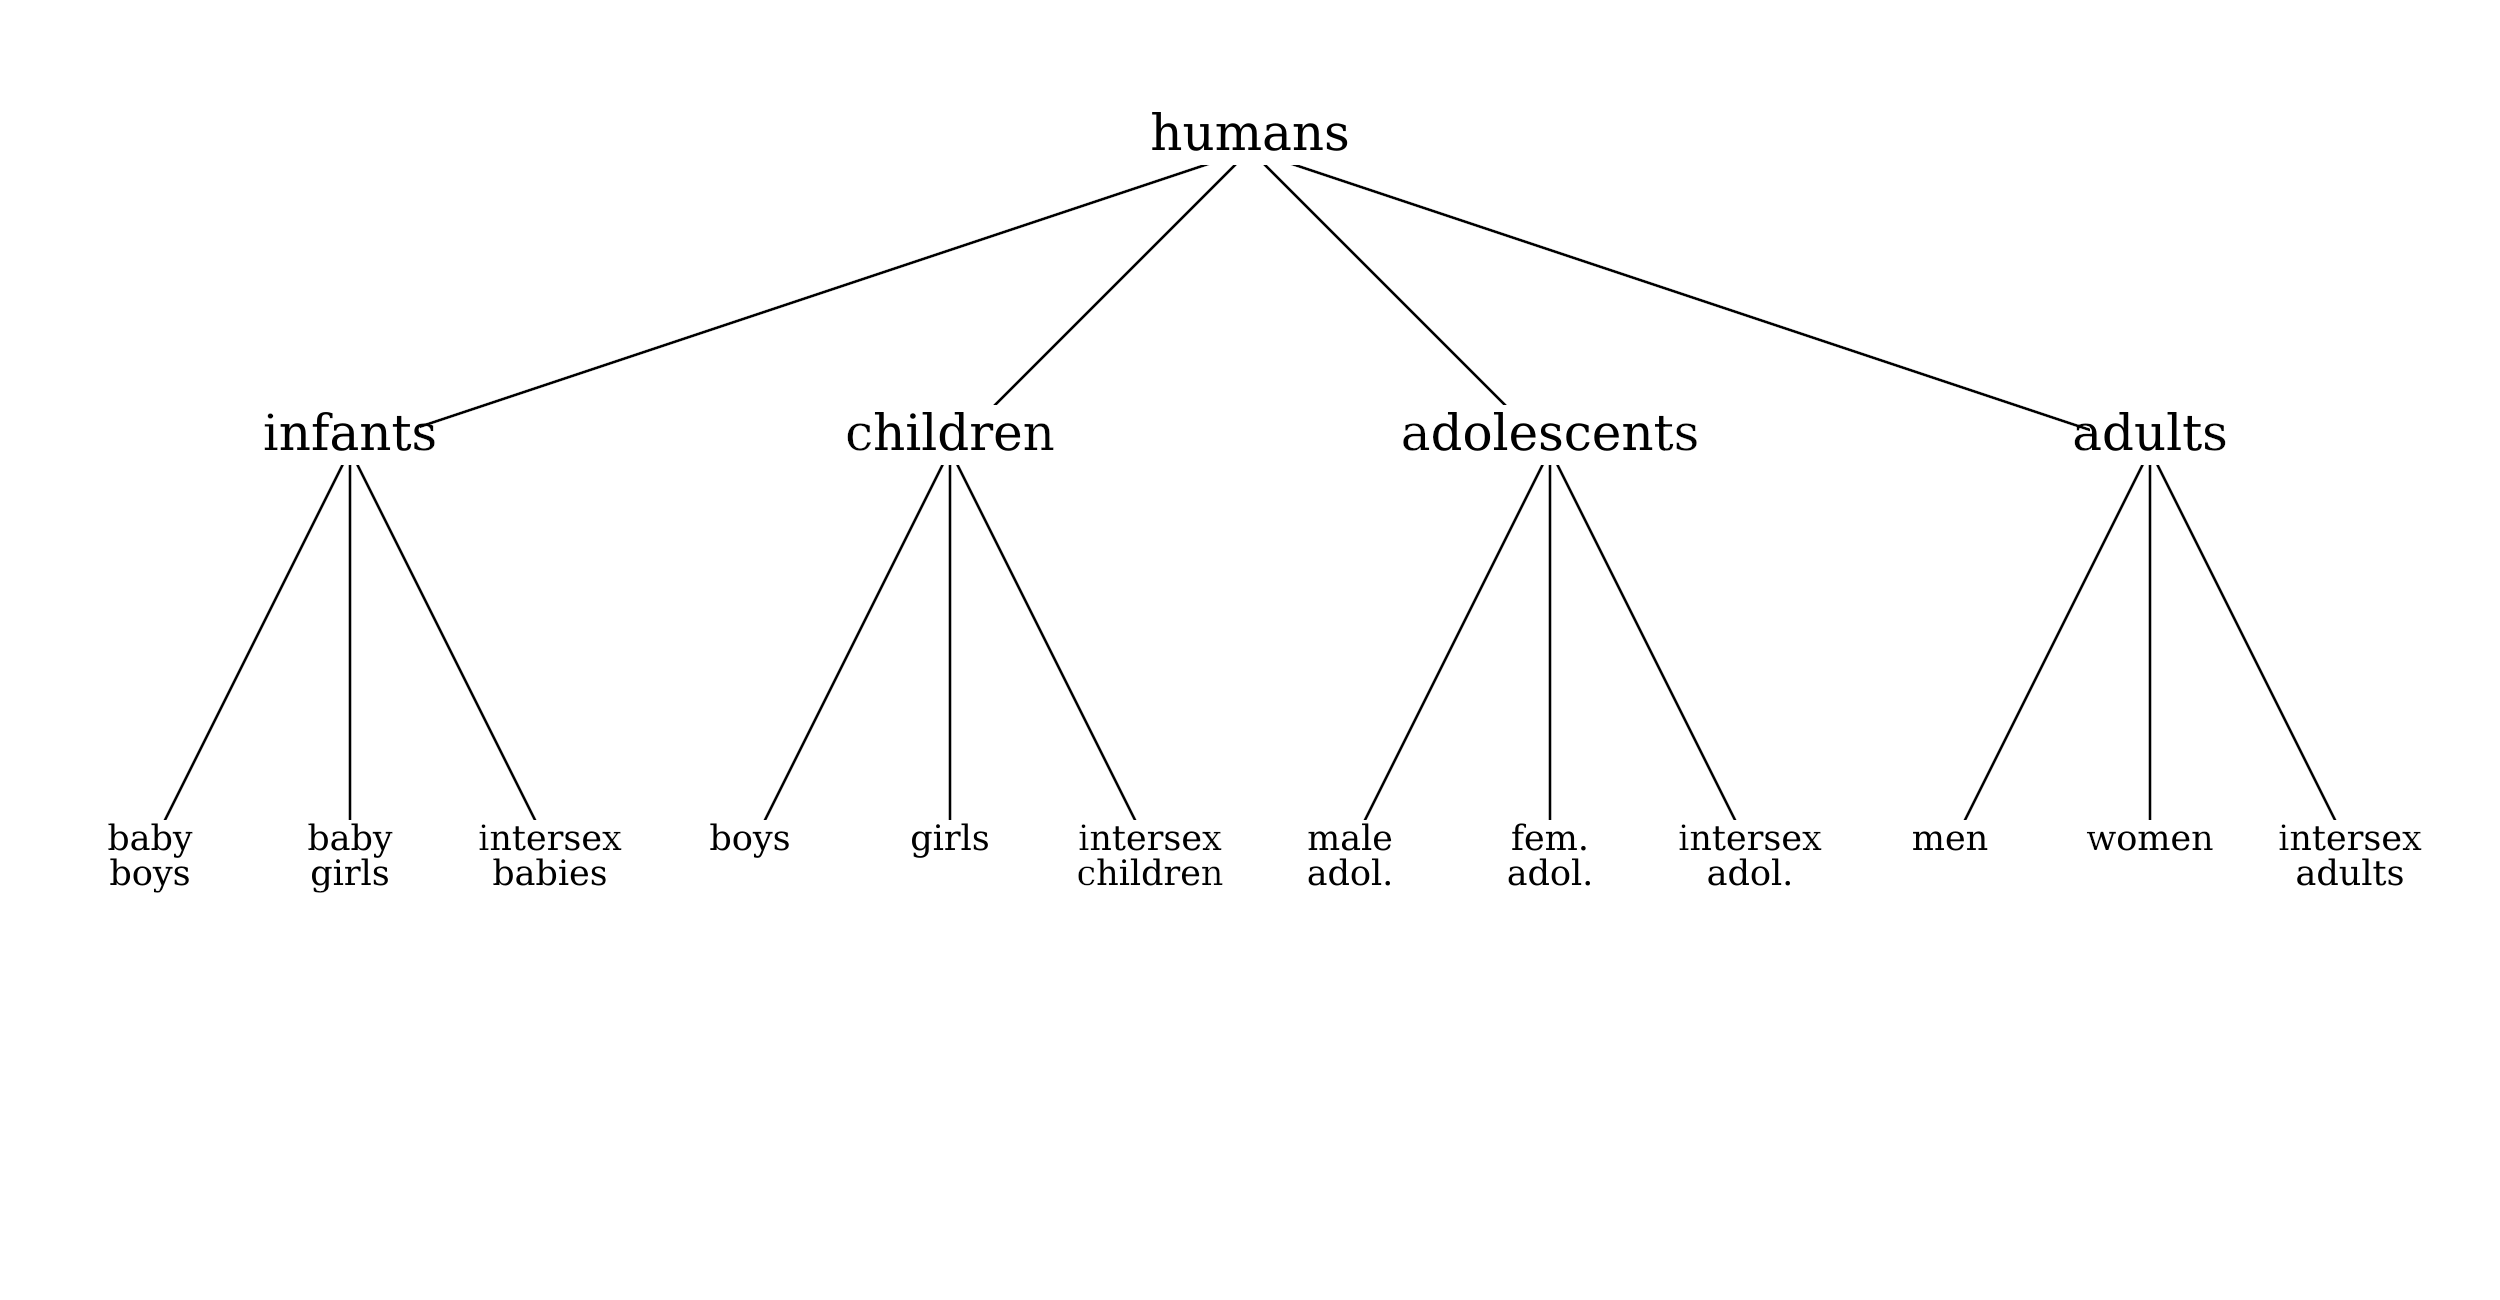 A tree diagram showing the category of humans subdivided into infants, children, adolescents, and adults, with additional subdivisions by gender.